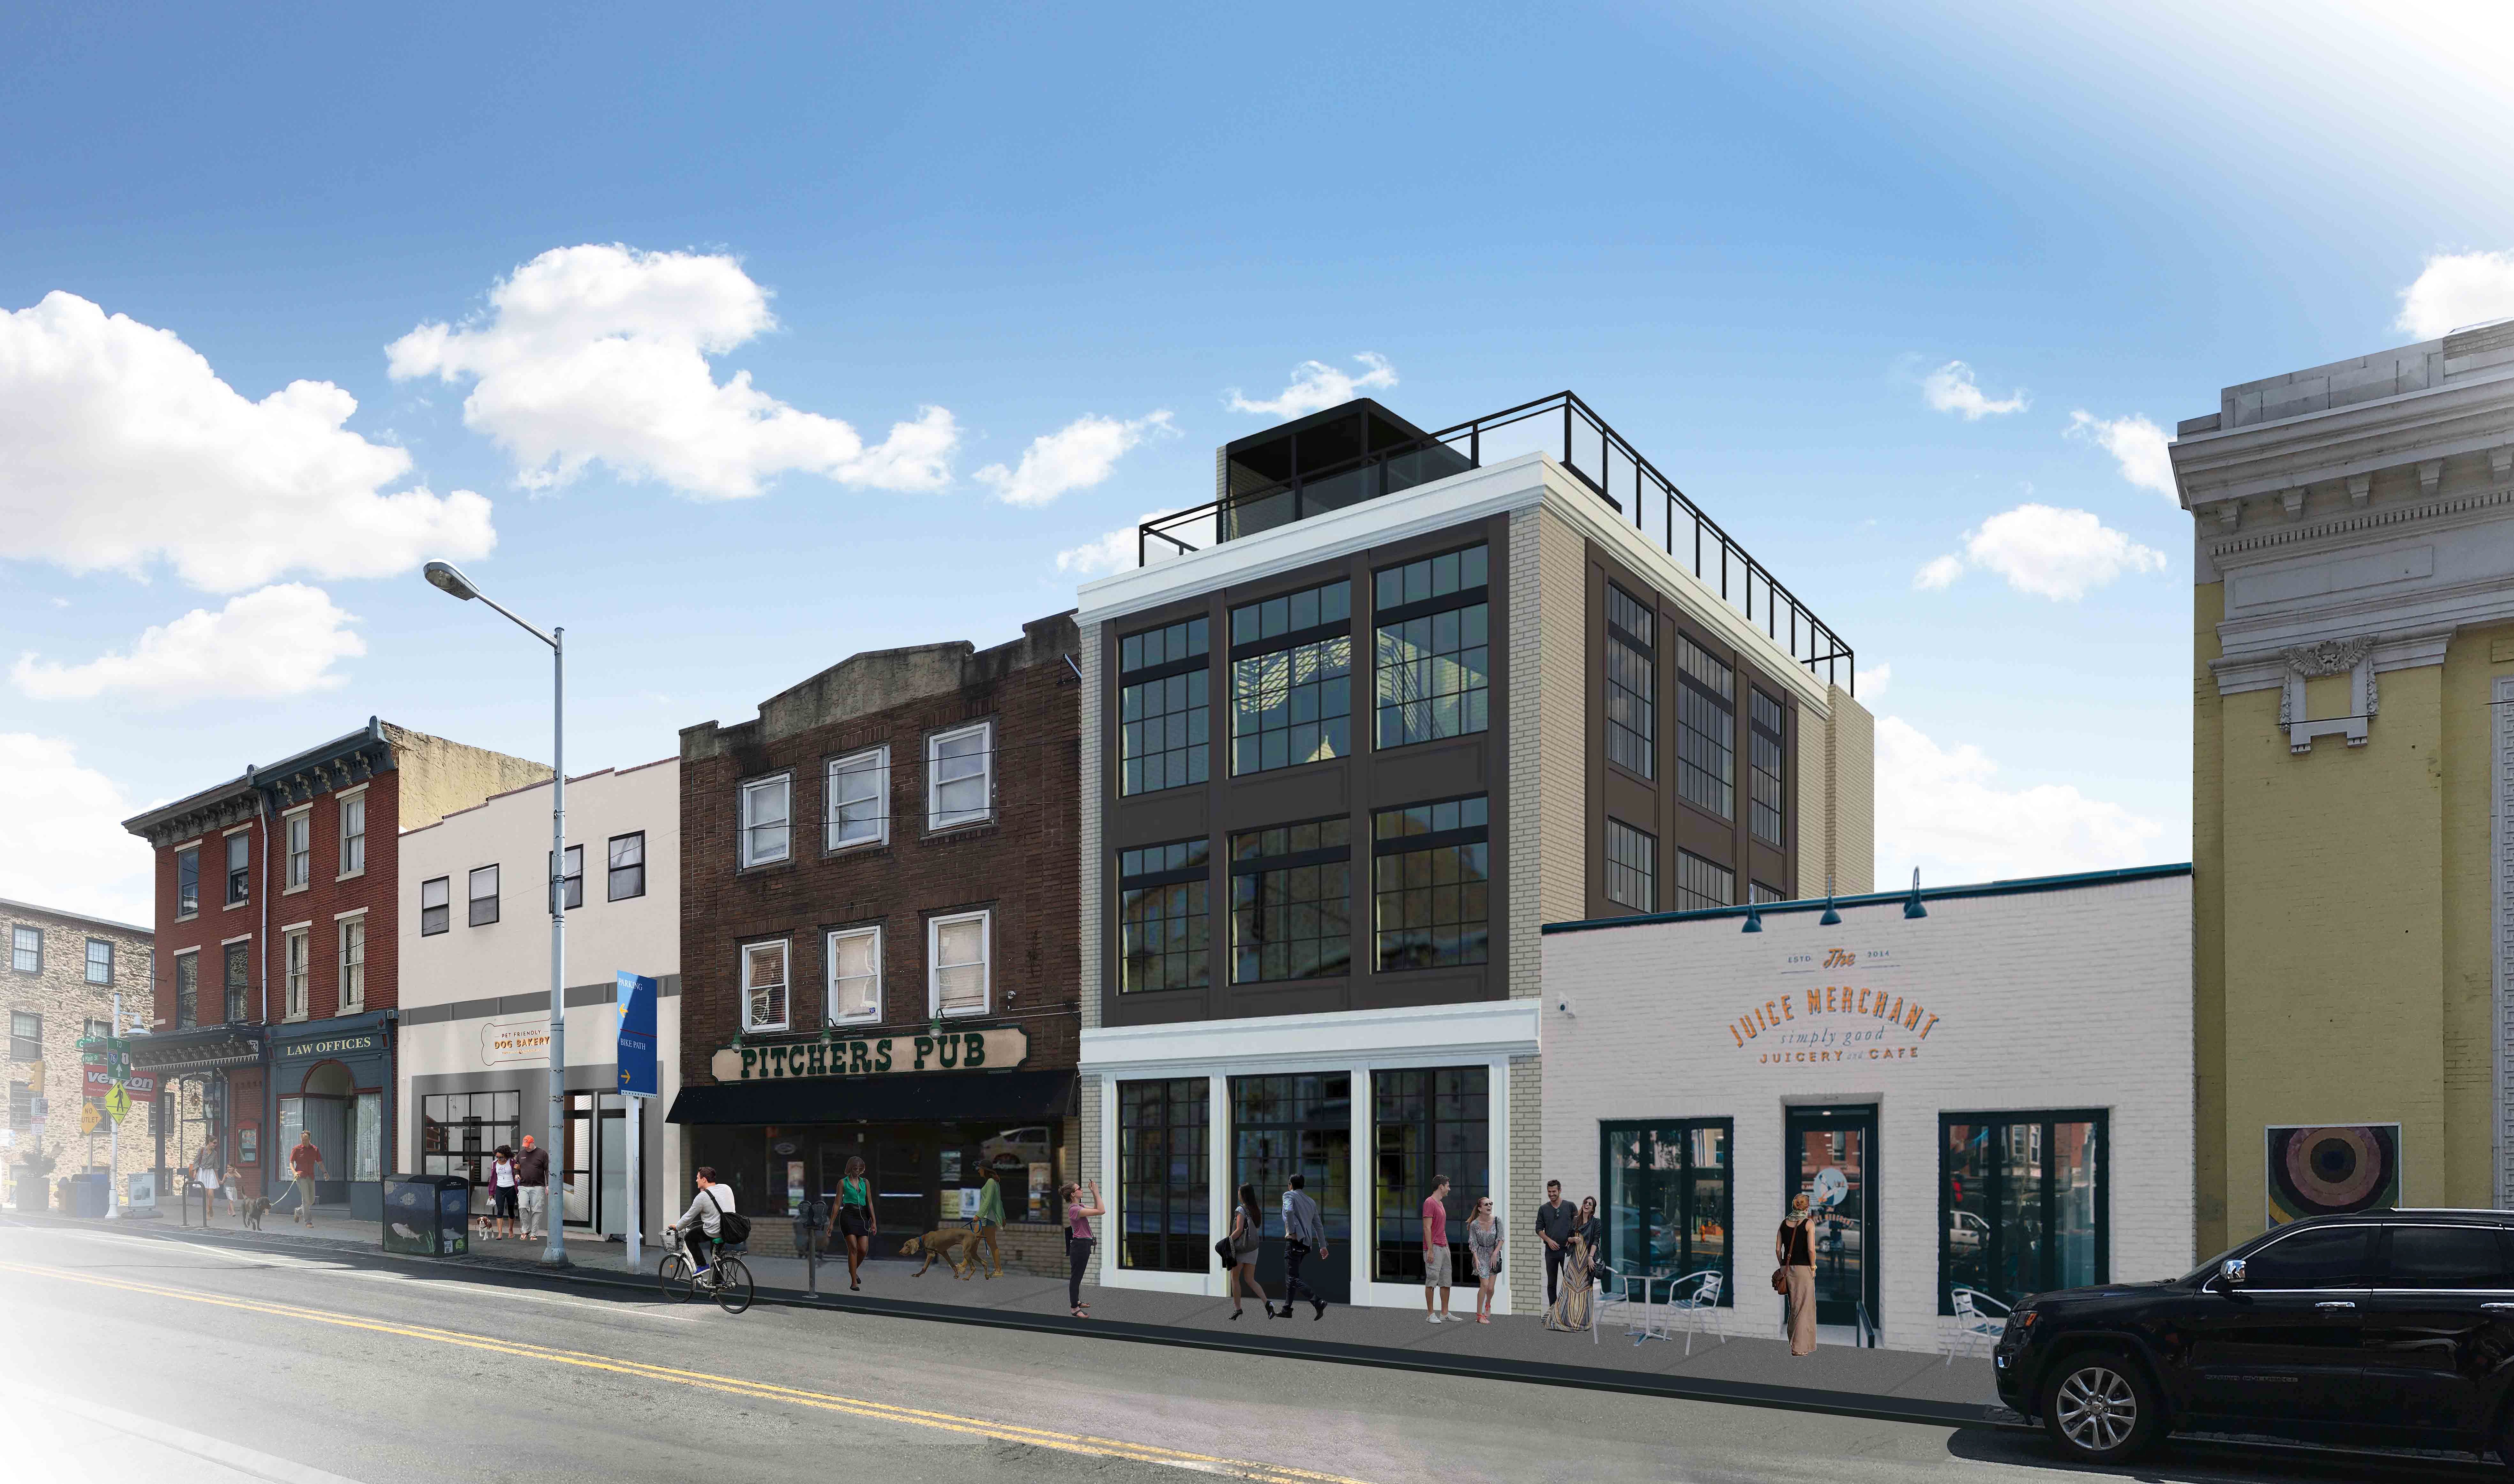 rendering of 4328 main street, courtesy of PJA Architecture